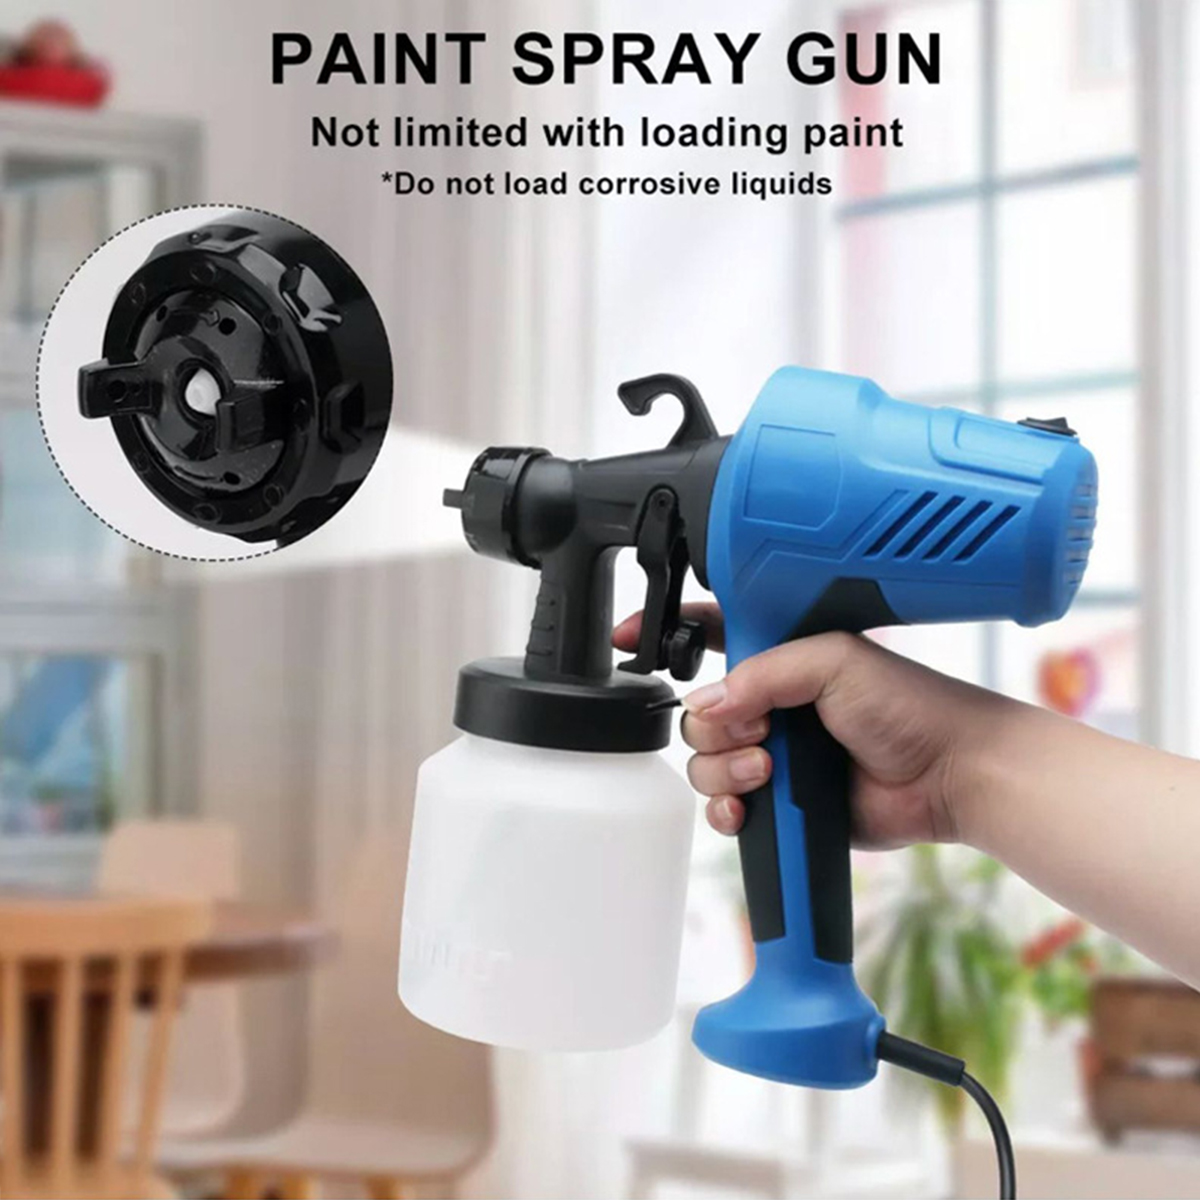 800ml-220V-400W-High-Power-Electric-Machine-Paint-Sprayer-Painting-Fogger-Sprayer-Tool-For-Indoor-An-1716537-1